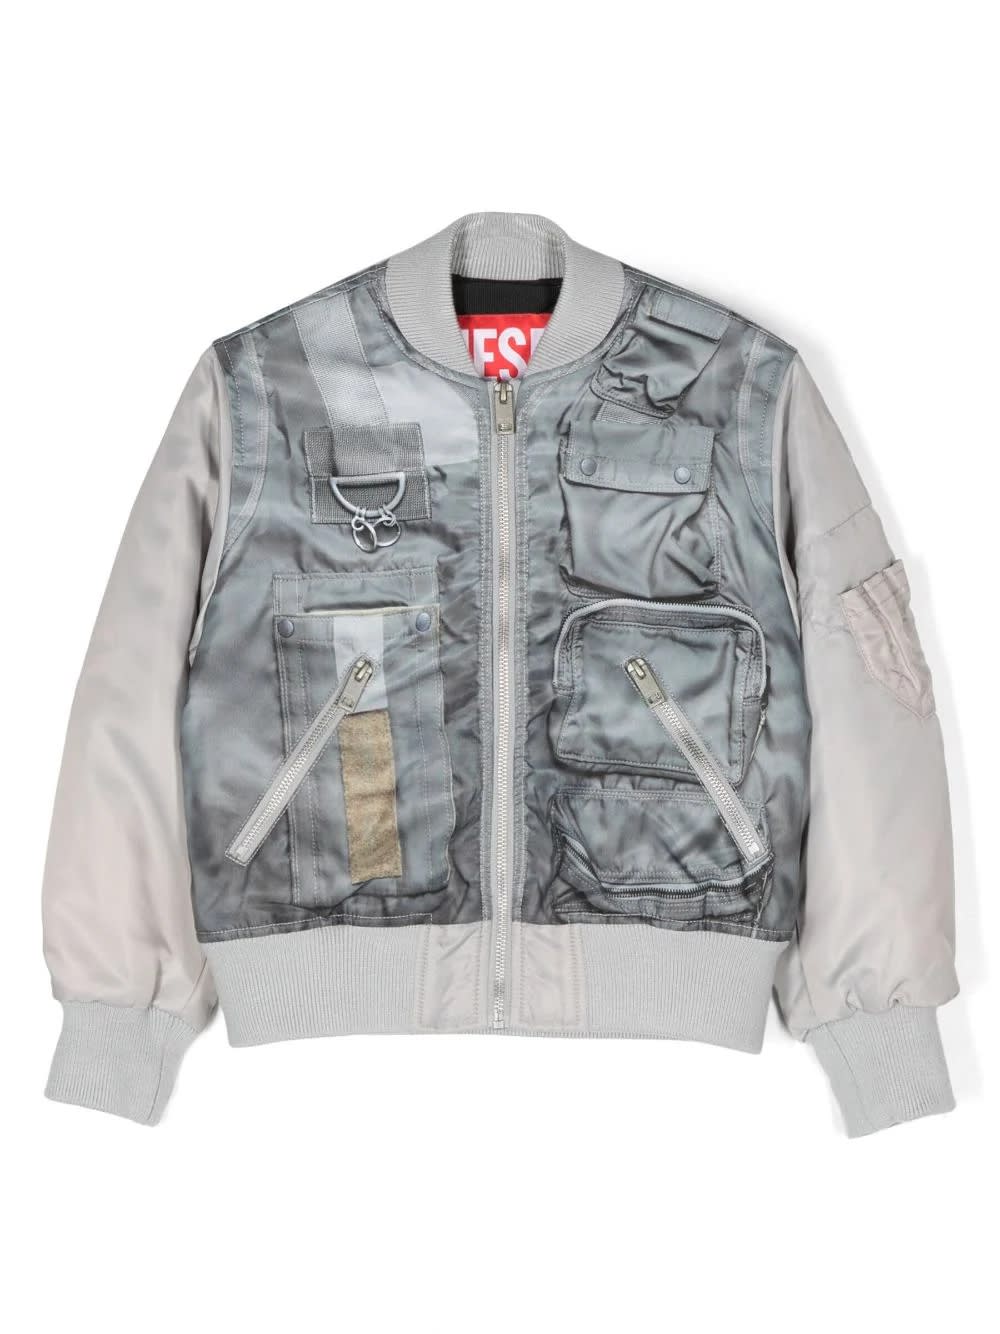 DIESEL BOMBER JACKET WITH LOGO